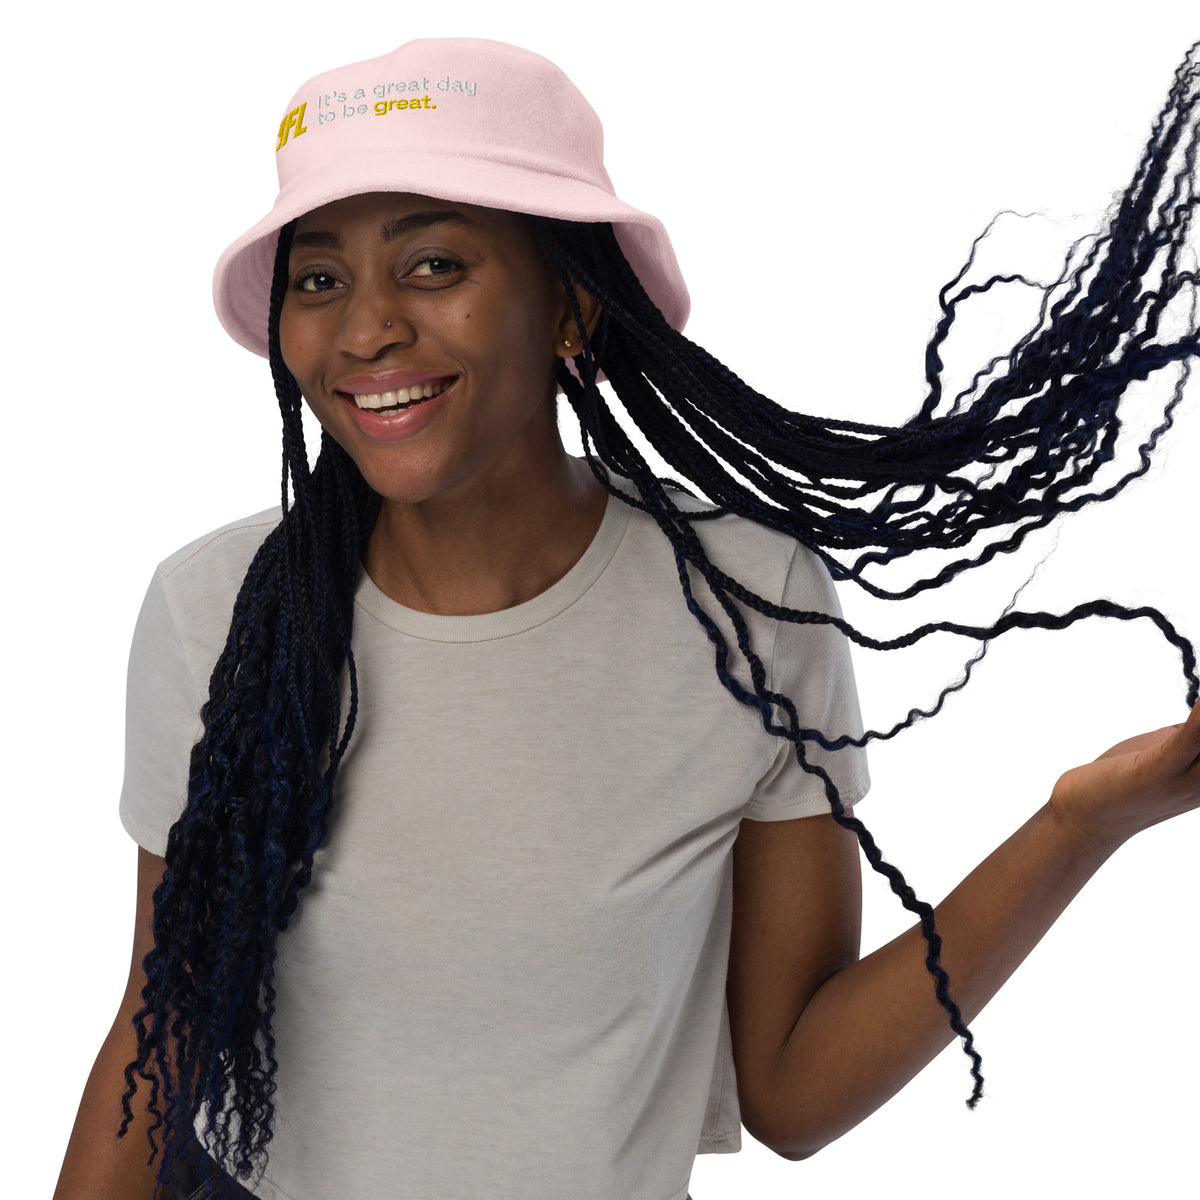 FL2024 "It's A Great Day To Be Great" Embroidered Terry Cloth Bucket Hat